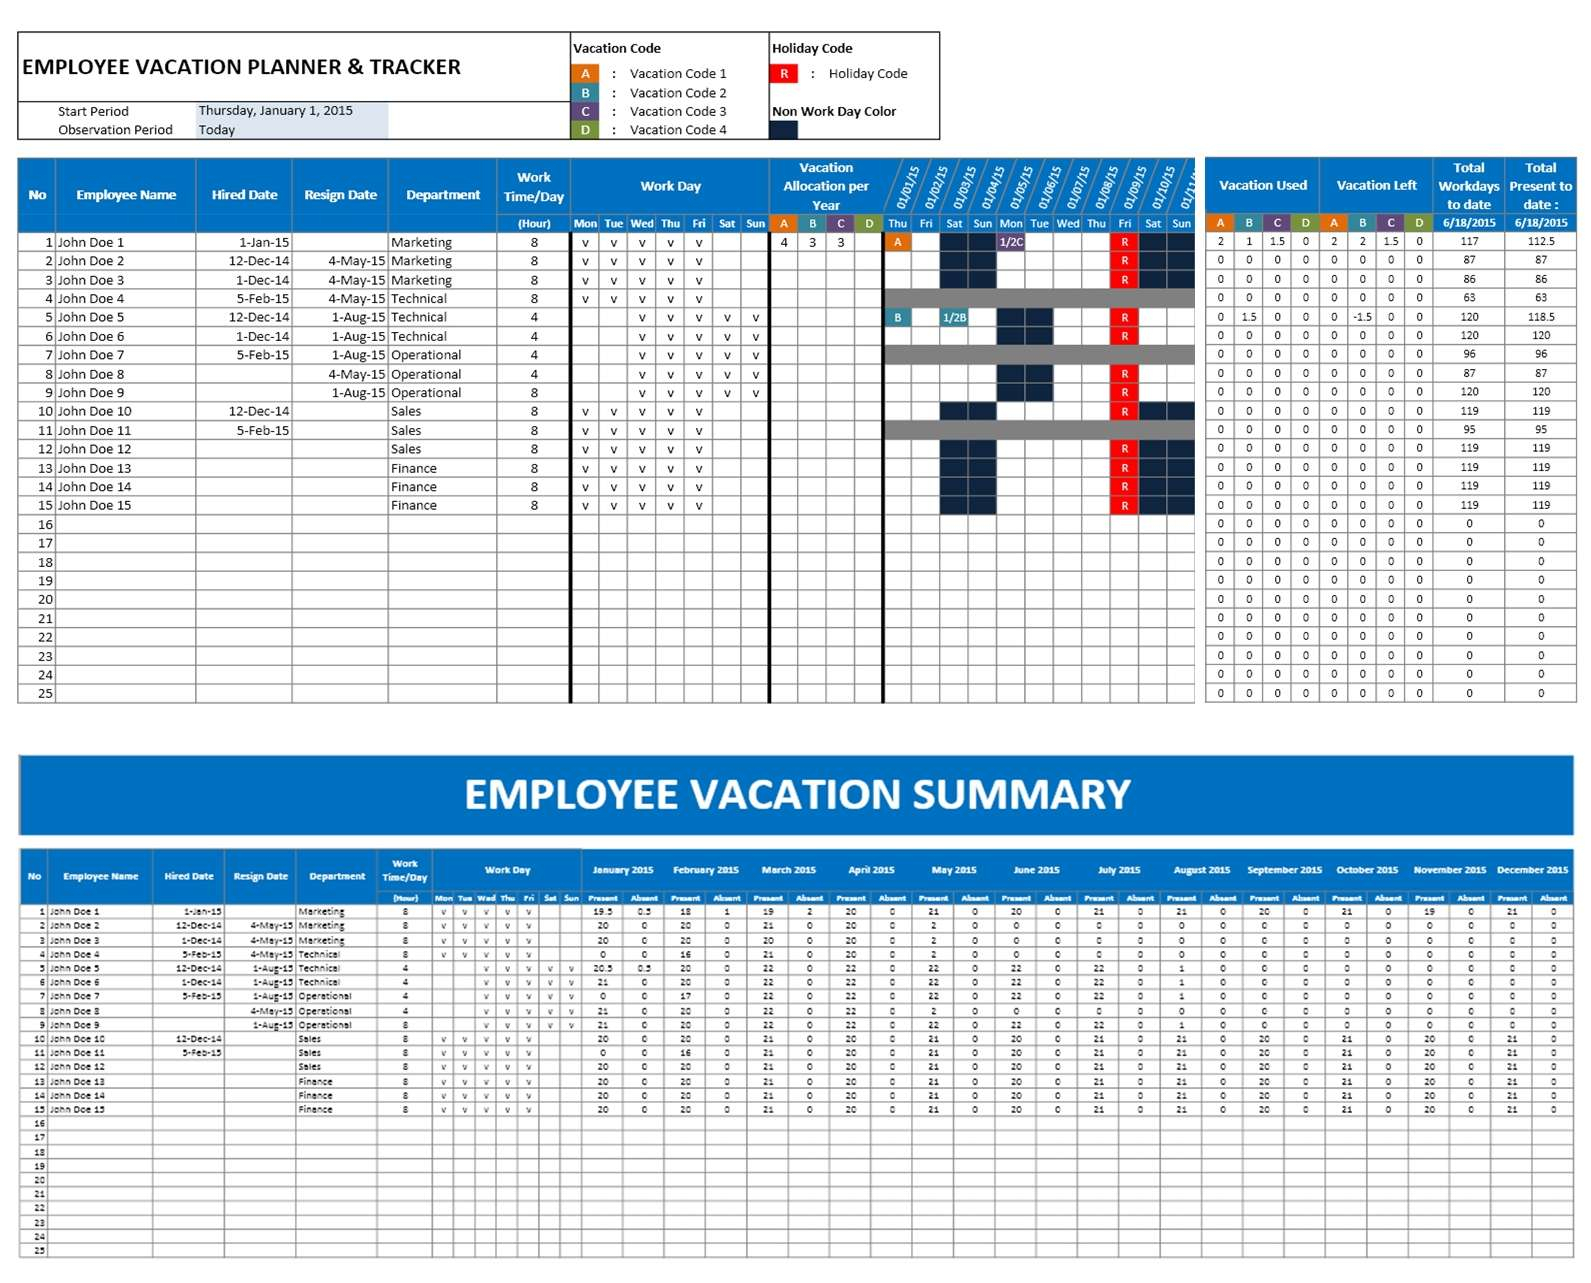 Free Employee Vacation Tracking Spreadsheet Template Inside Employee Vacation Template  Kasare.annafora.co